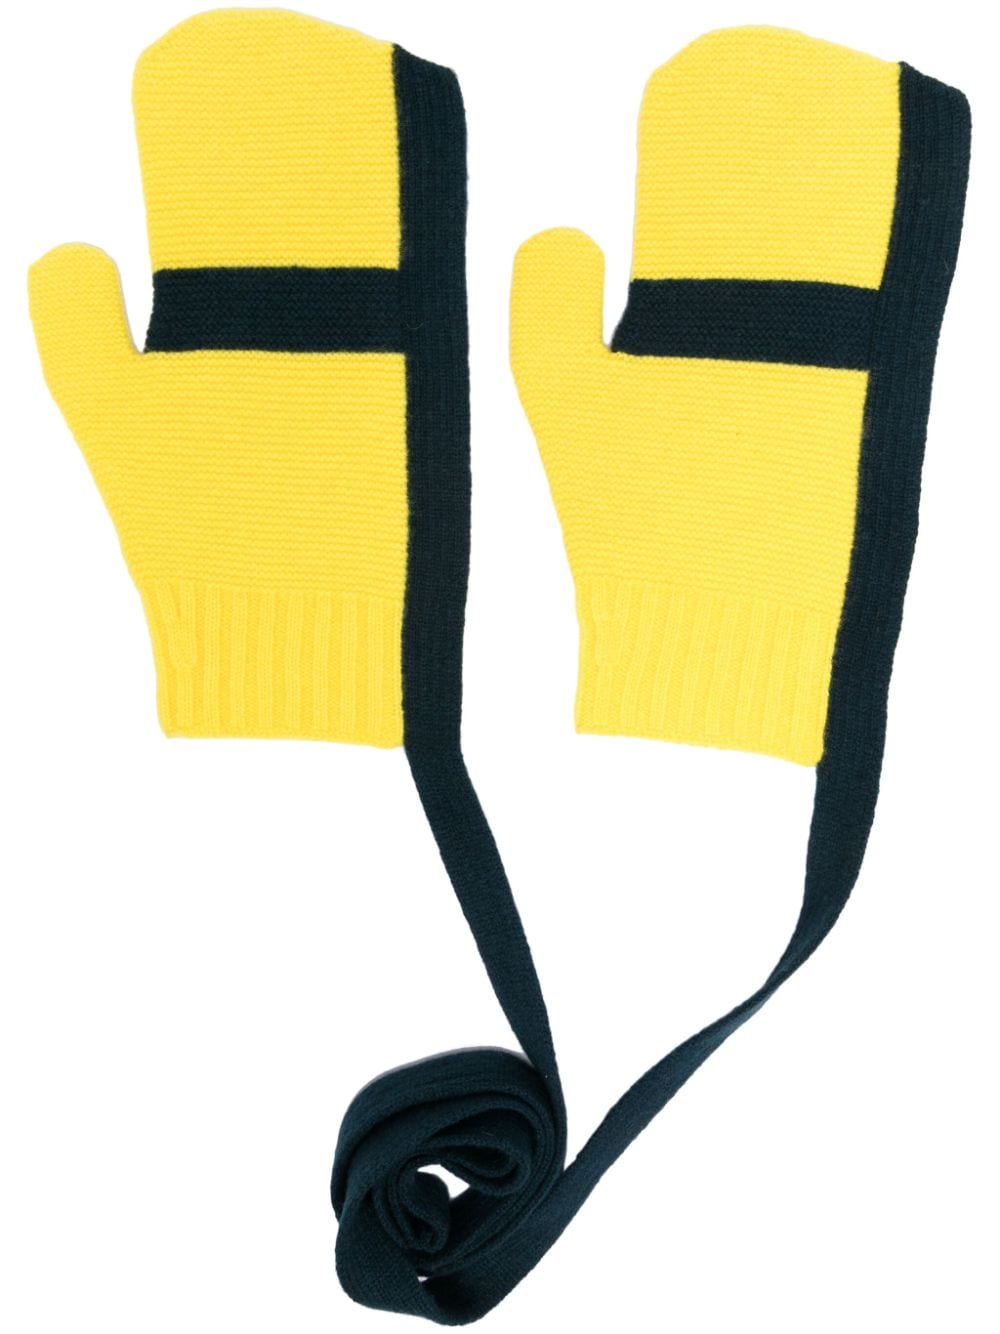 Homme Plissé Issey Miyake two-tone ribbed gloves - Yellow von Homme Plissé Issey Miyake